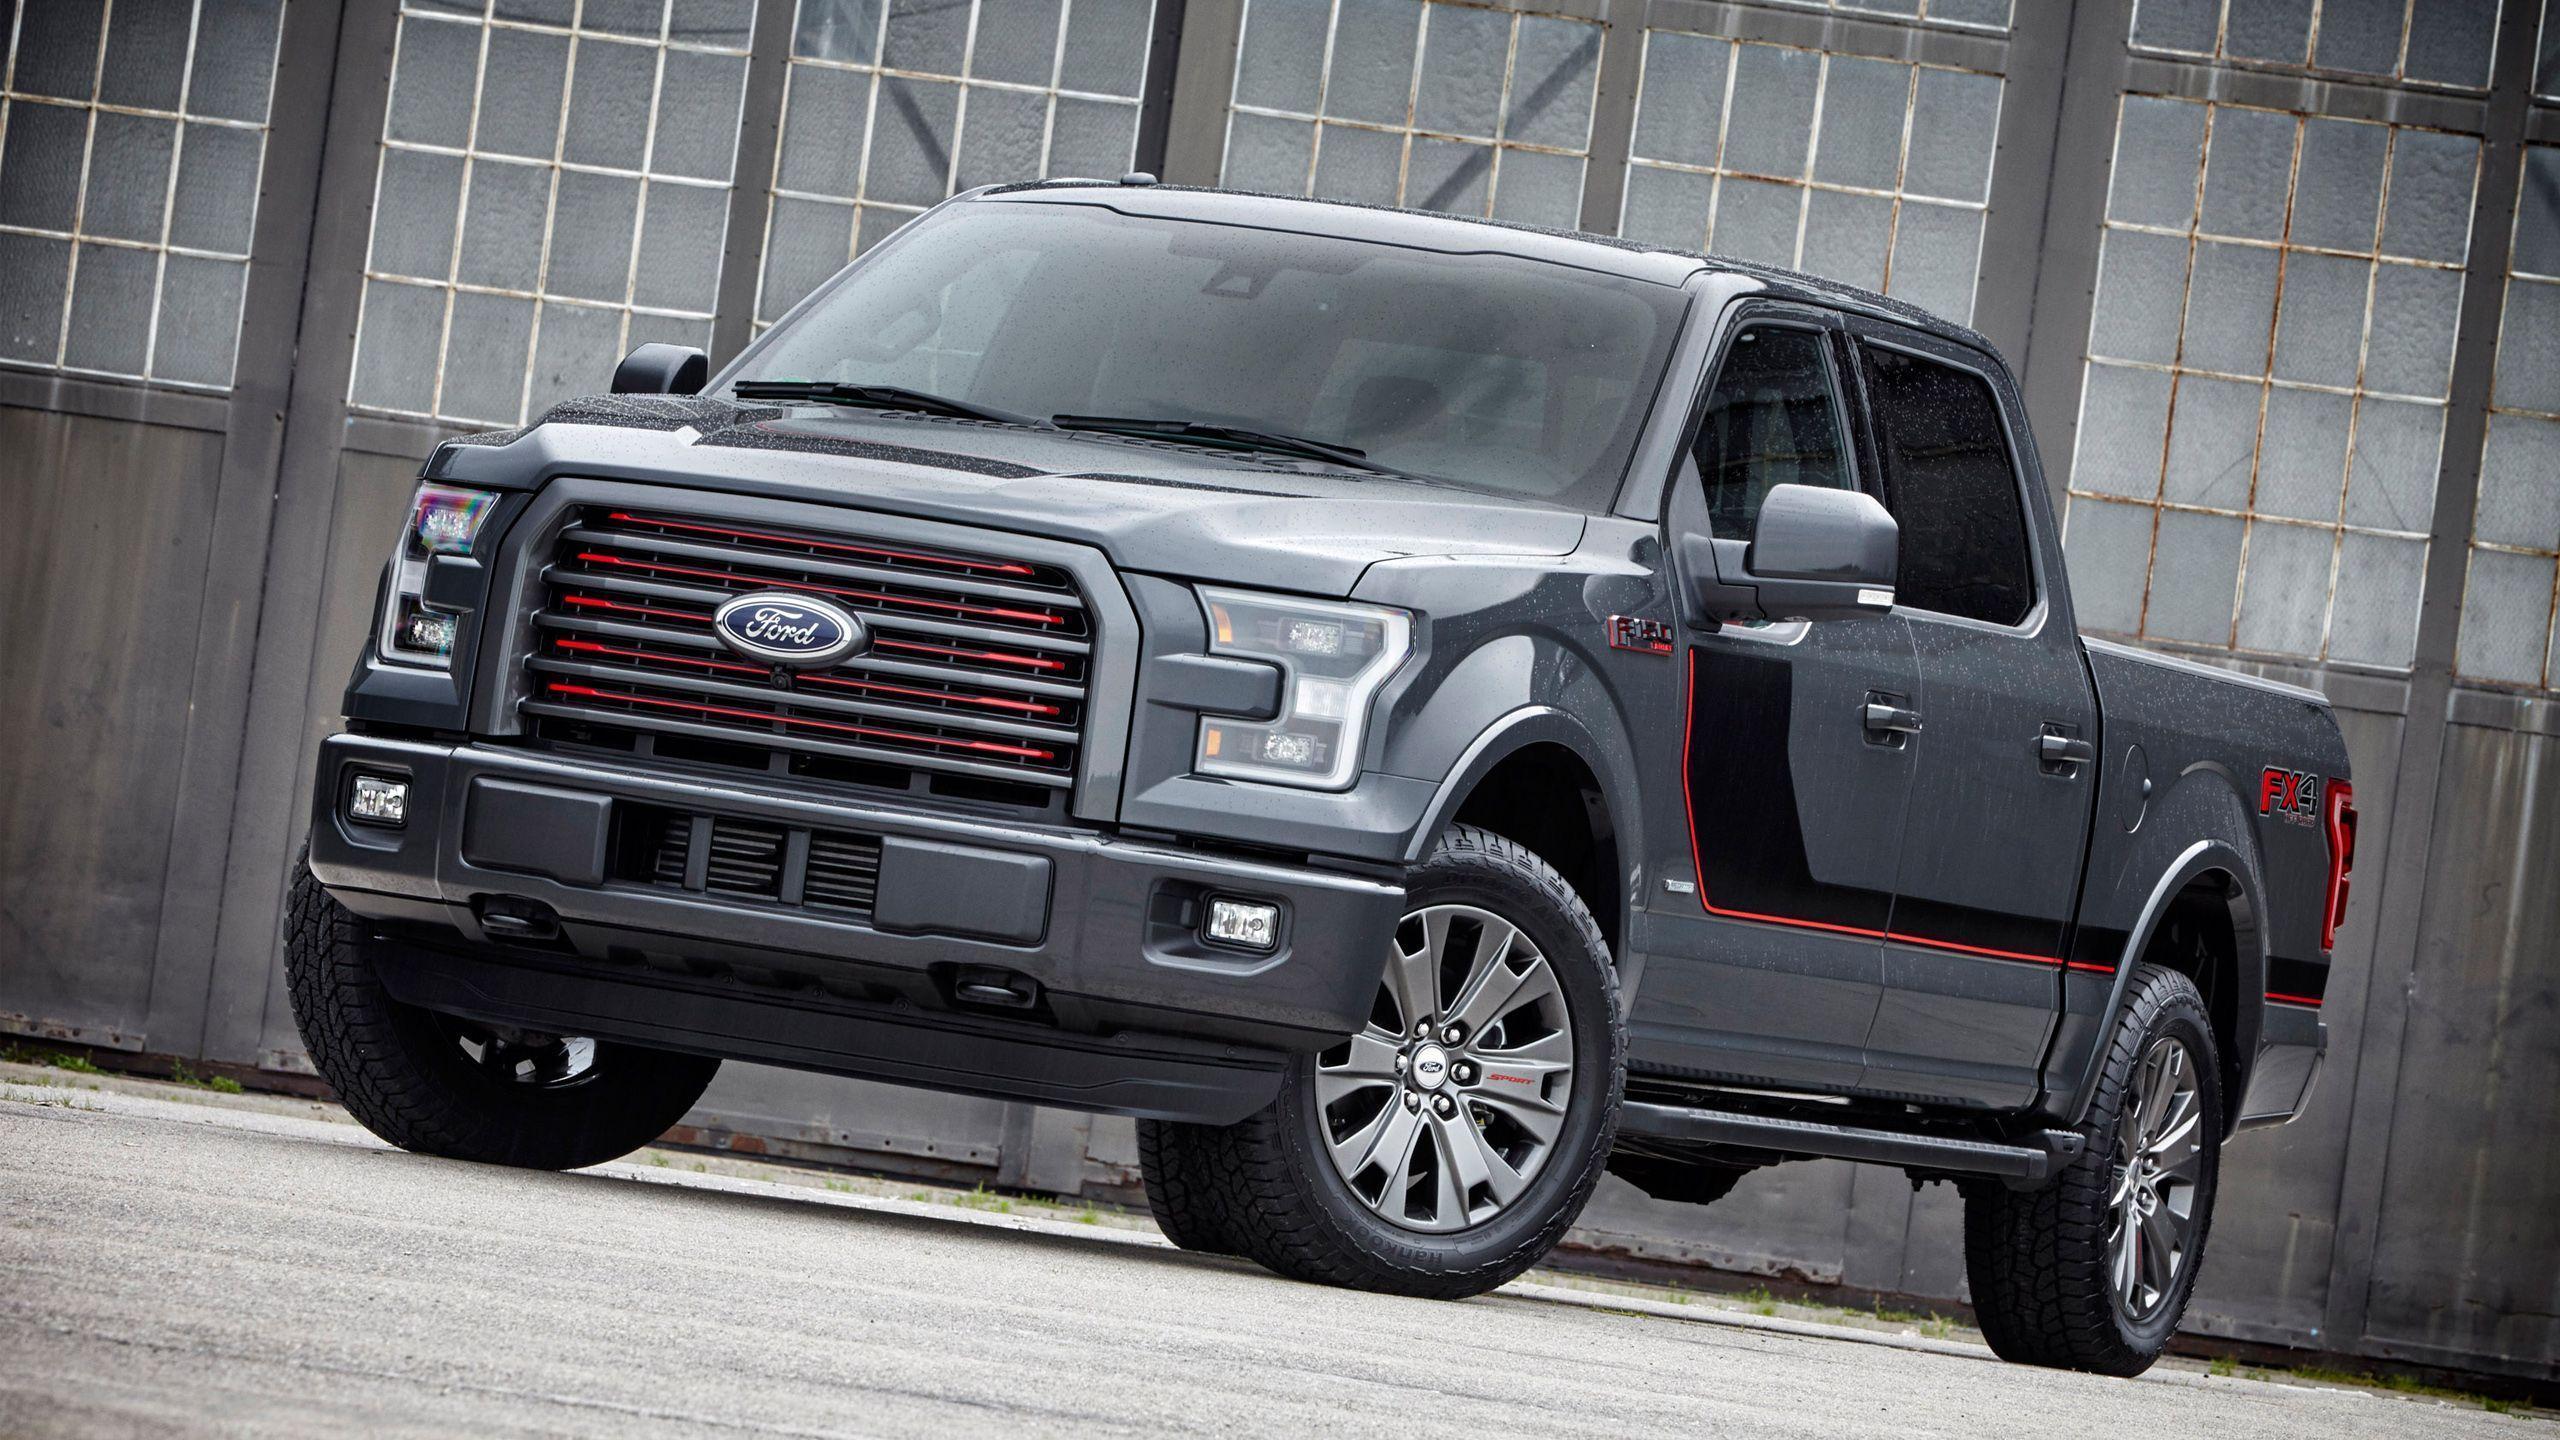 Ford F 150 Lariat Appearance Package Wallpaper. HD Car